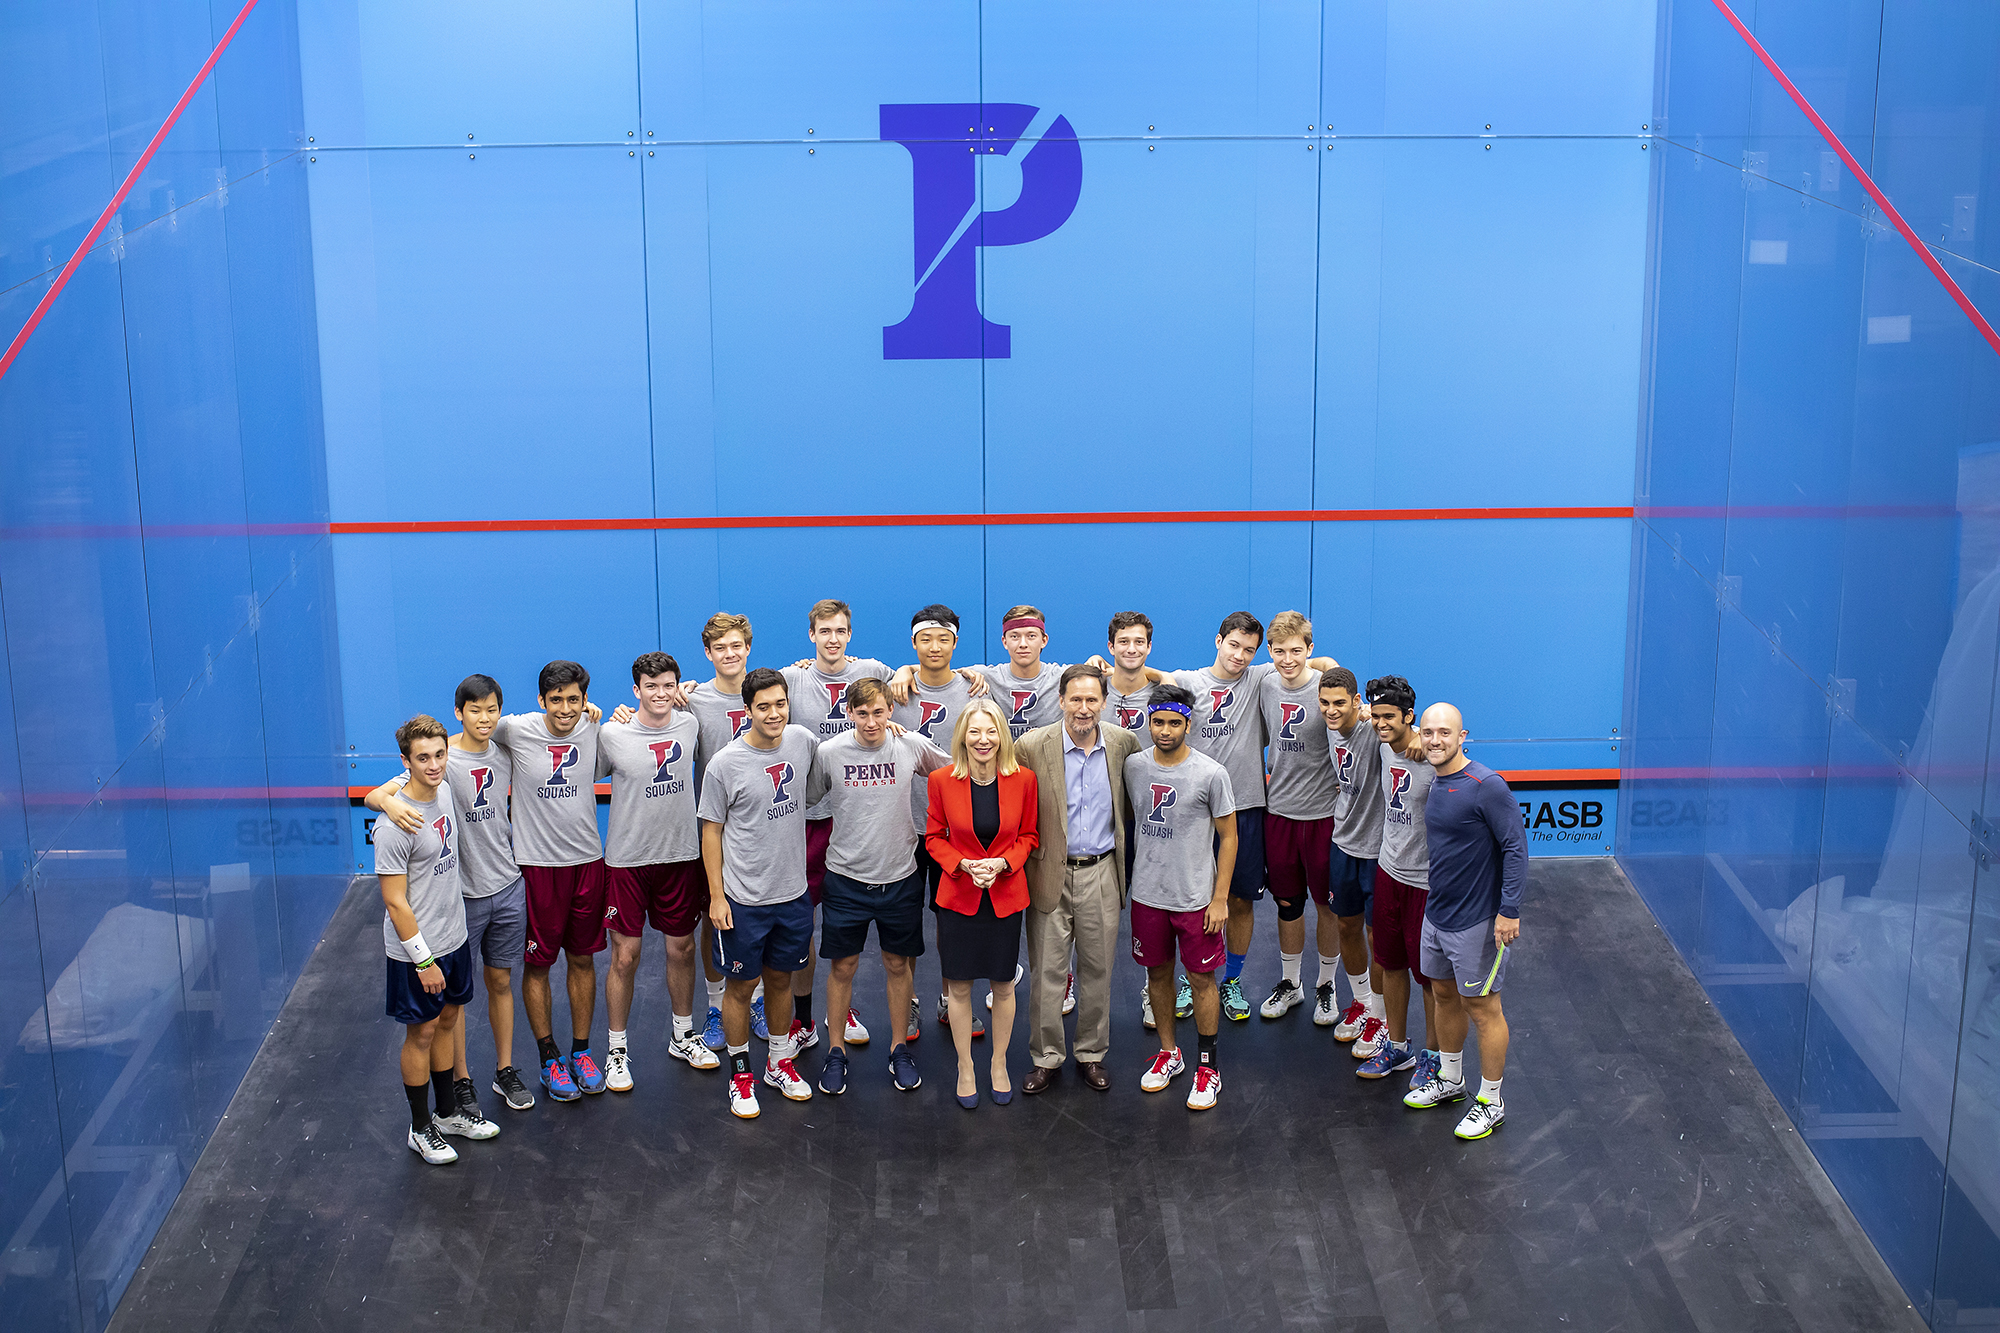 President Gutmann and her husband University Professor Michael Doyle of Columbia pose with members of the men's squash team in one of the new glass courts.